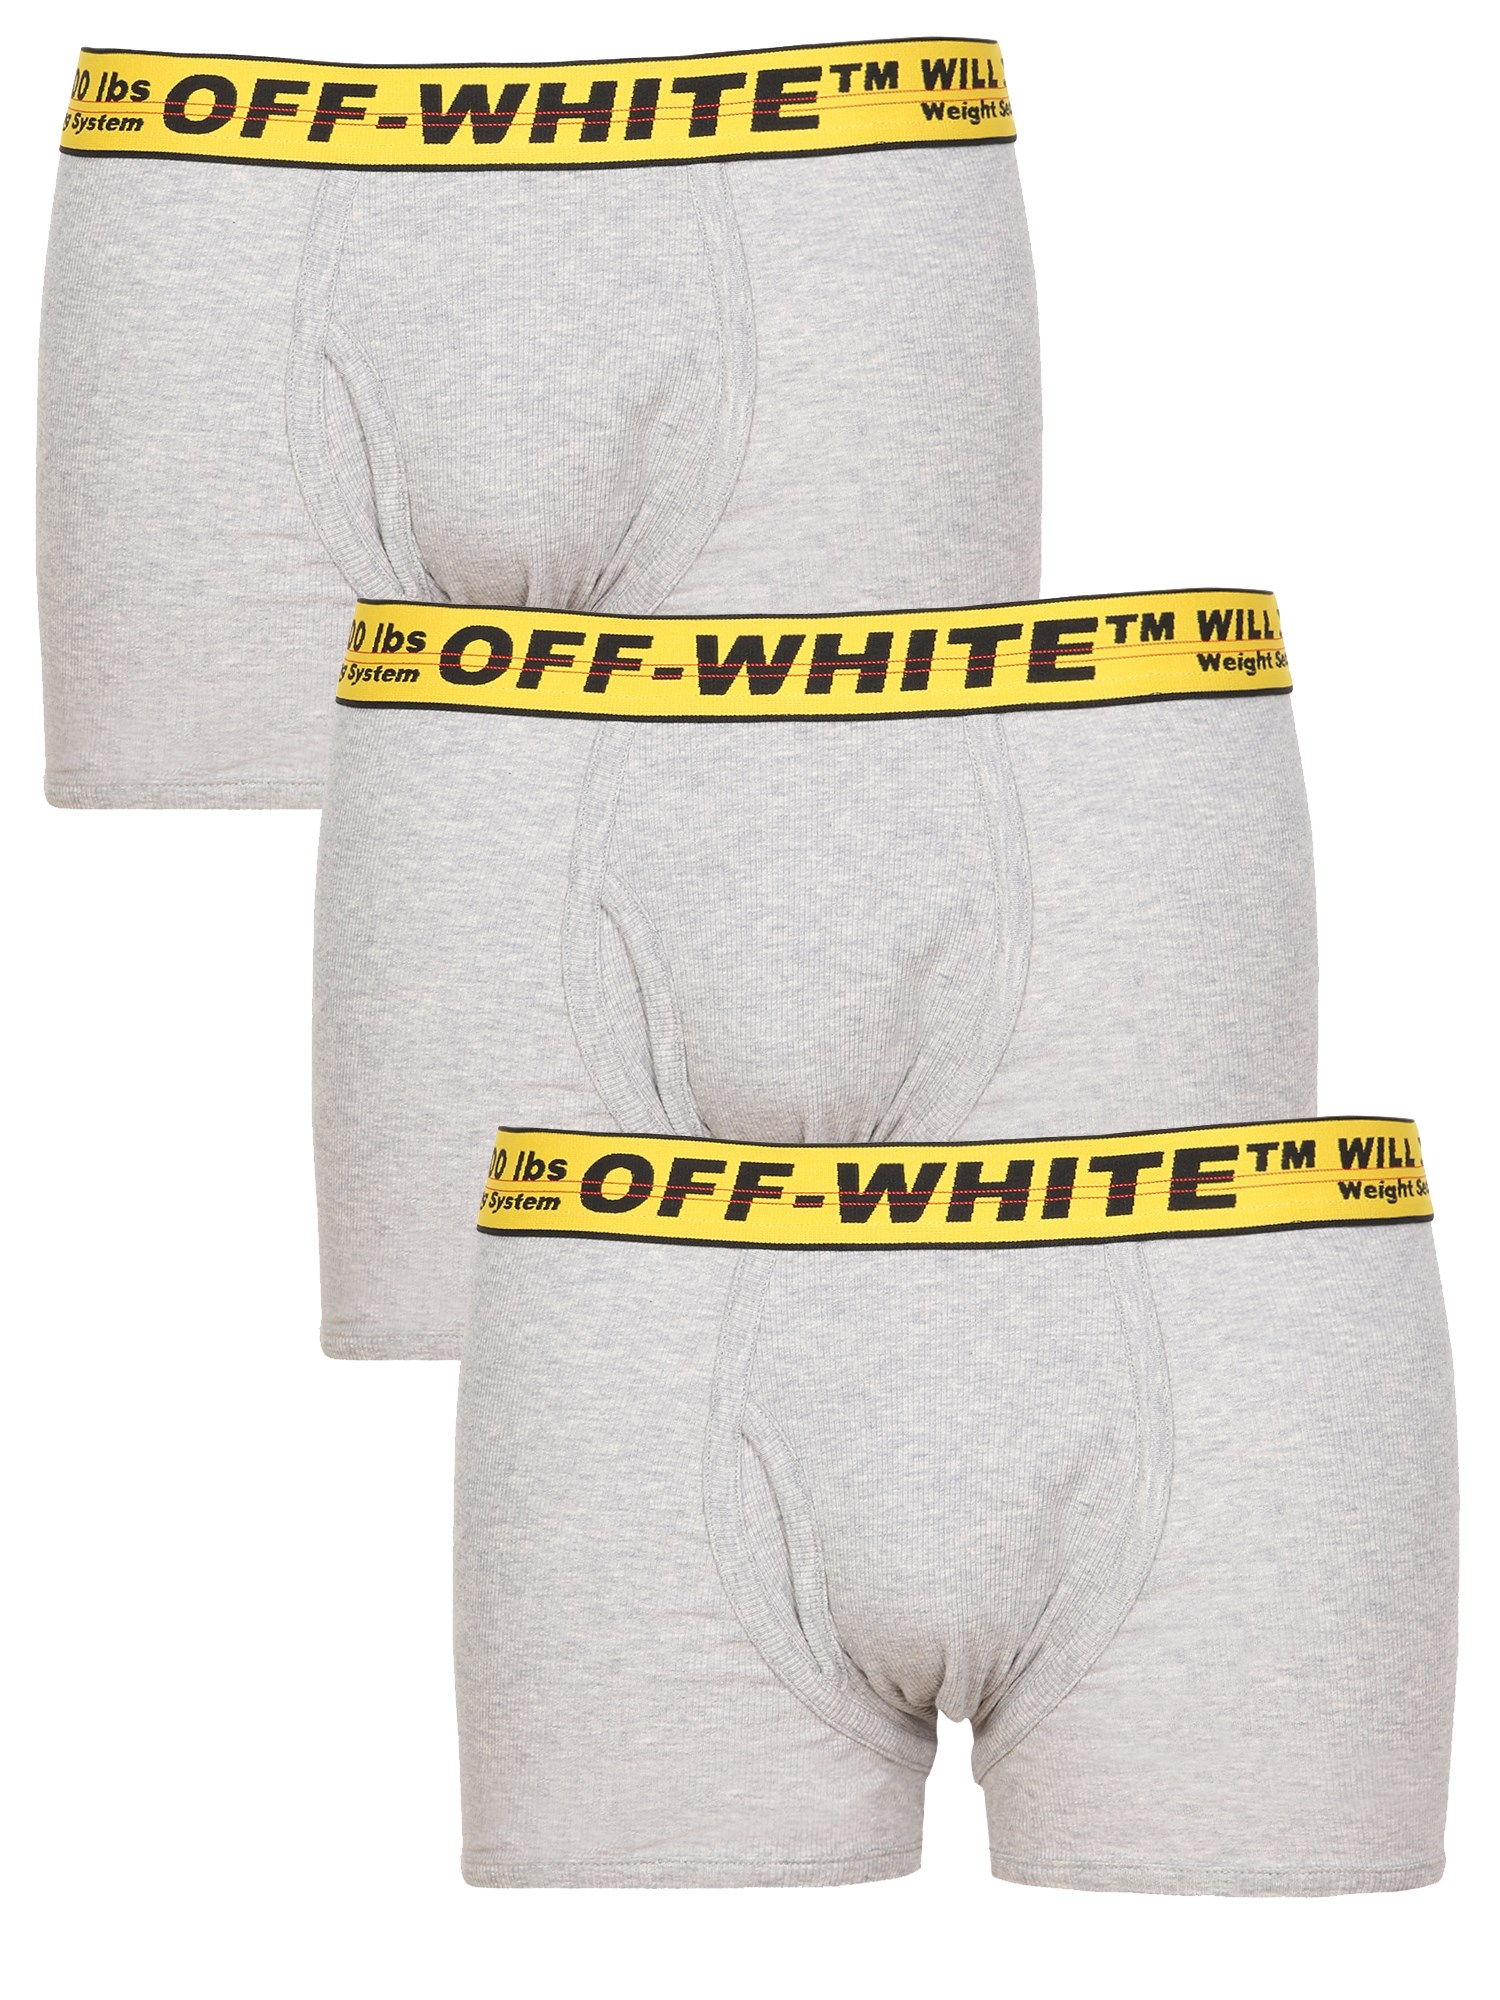 OFF-WHITE stores in Spain SHOPenauer